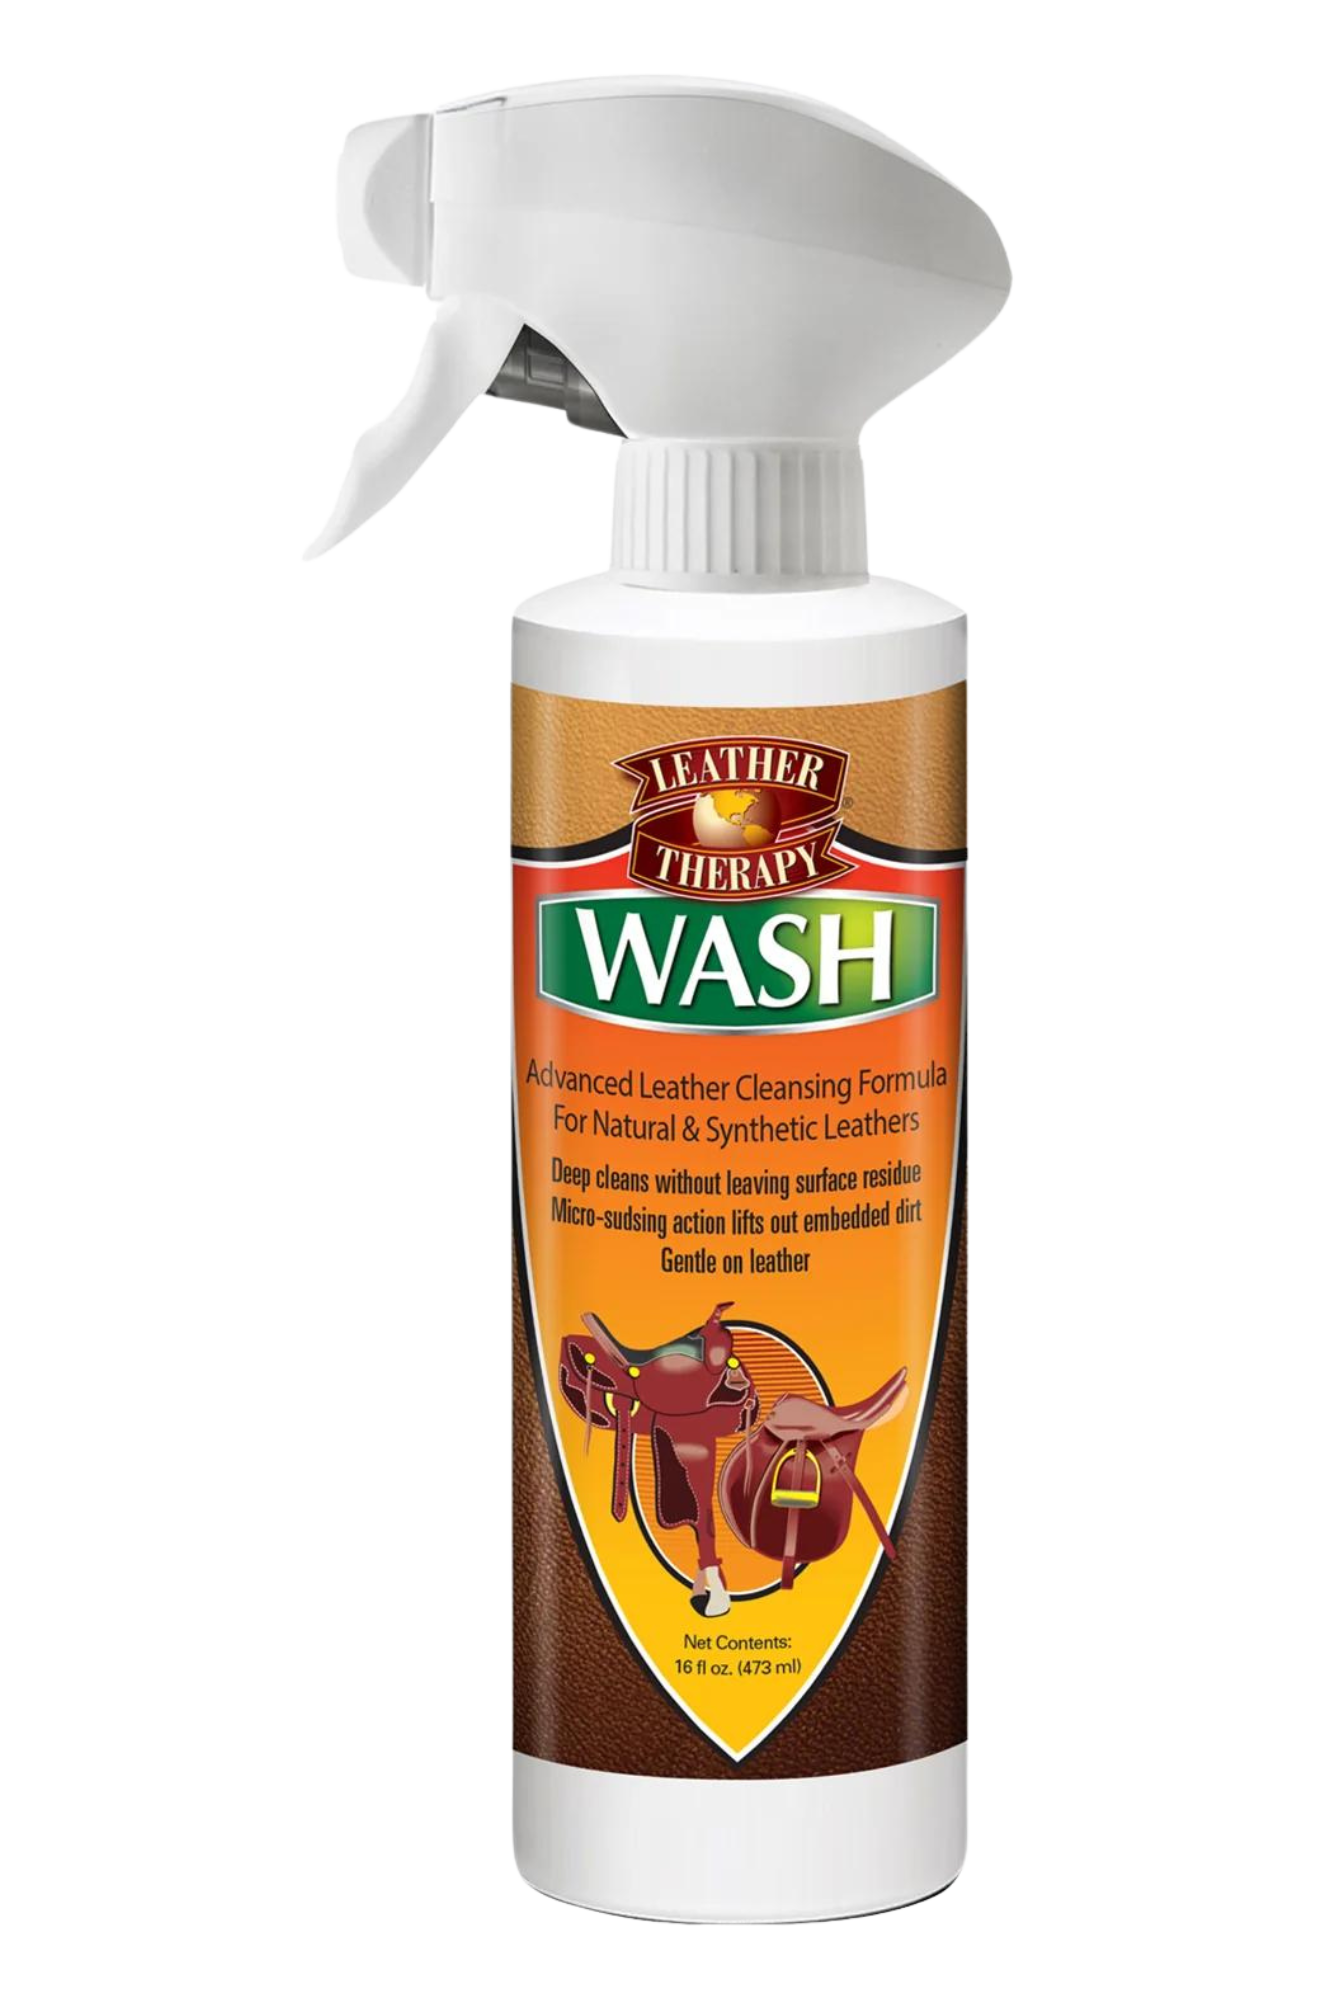 LEATHER THERAPY WASH